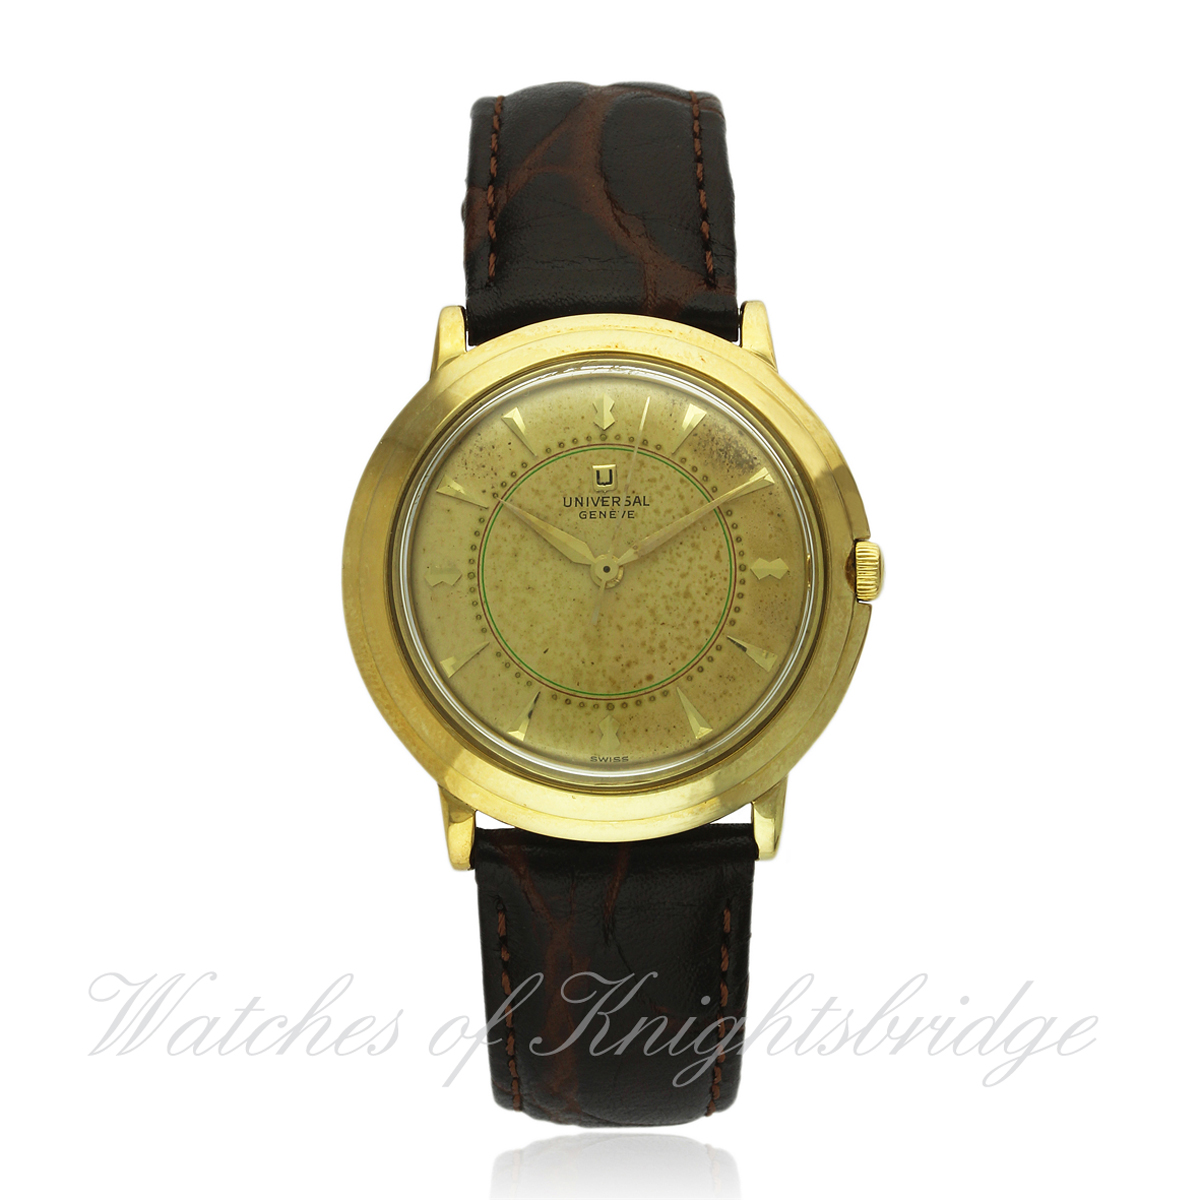 A GENTLEMAN`S 14K SOLID GOLD UNIVERSAL GENEVE WRIST WATCH CIRCA 1960s D: Champagne dial with gilt "